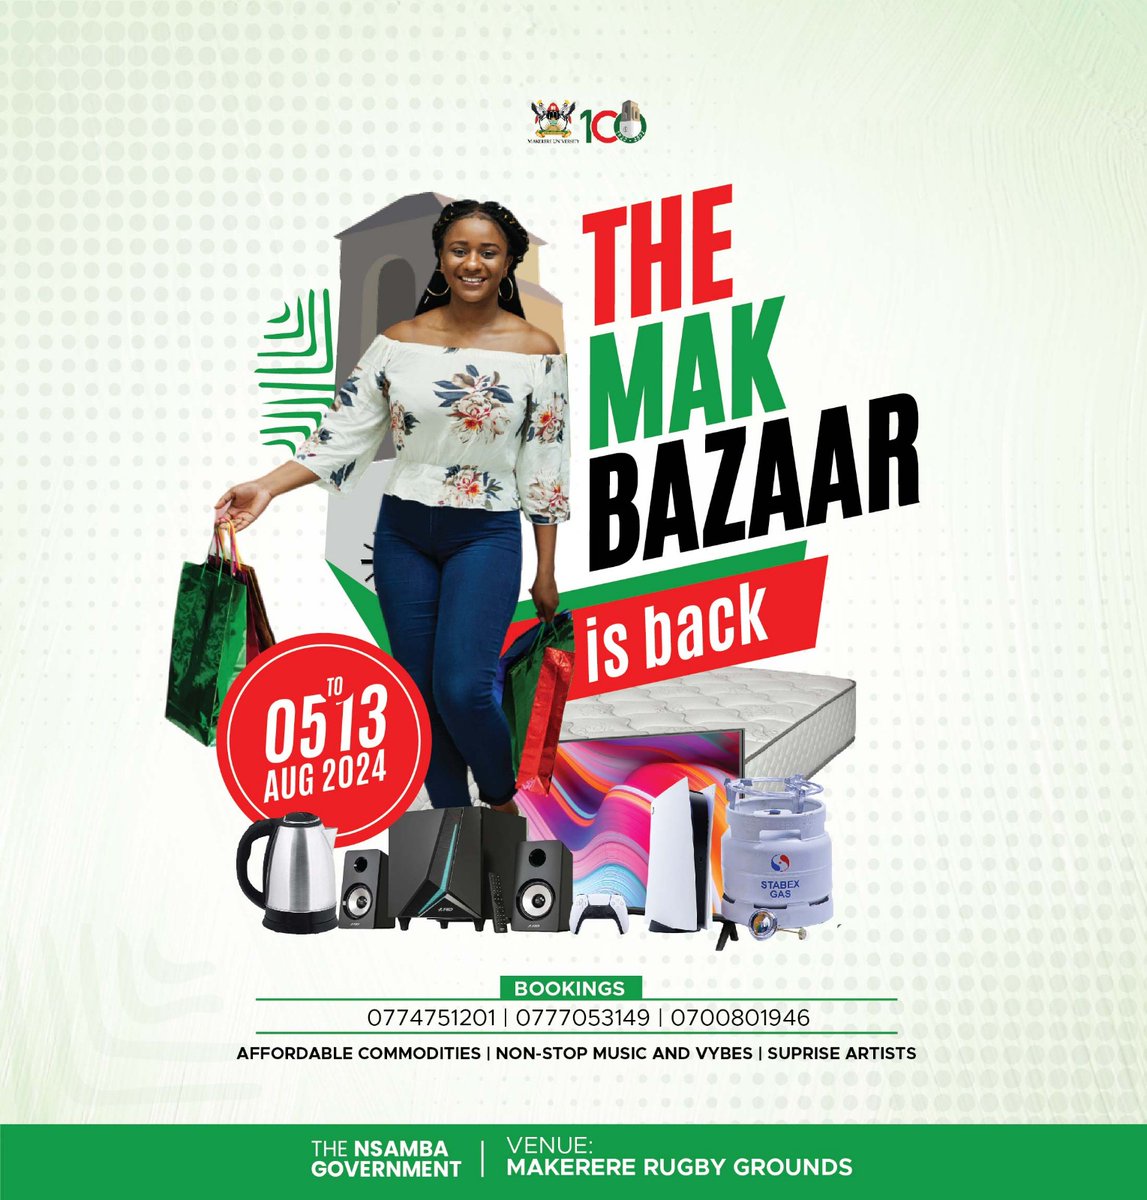 THE BAZAAR IS HERE!!! 5th - 13th August 2024, we usher the freshmen to the hill. The one-stop centre for all the commodities you need to start your life at the Hill. Courtesy of the Guild Ministry of Culture, Social Affairs and Mobilization.